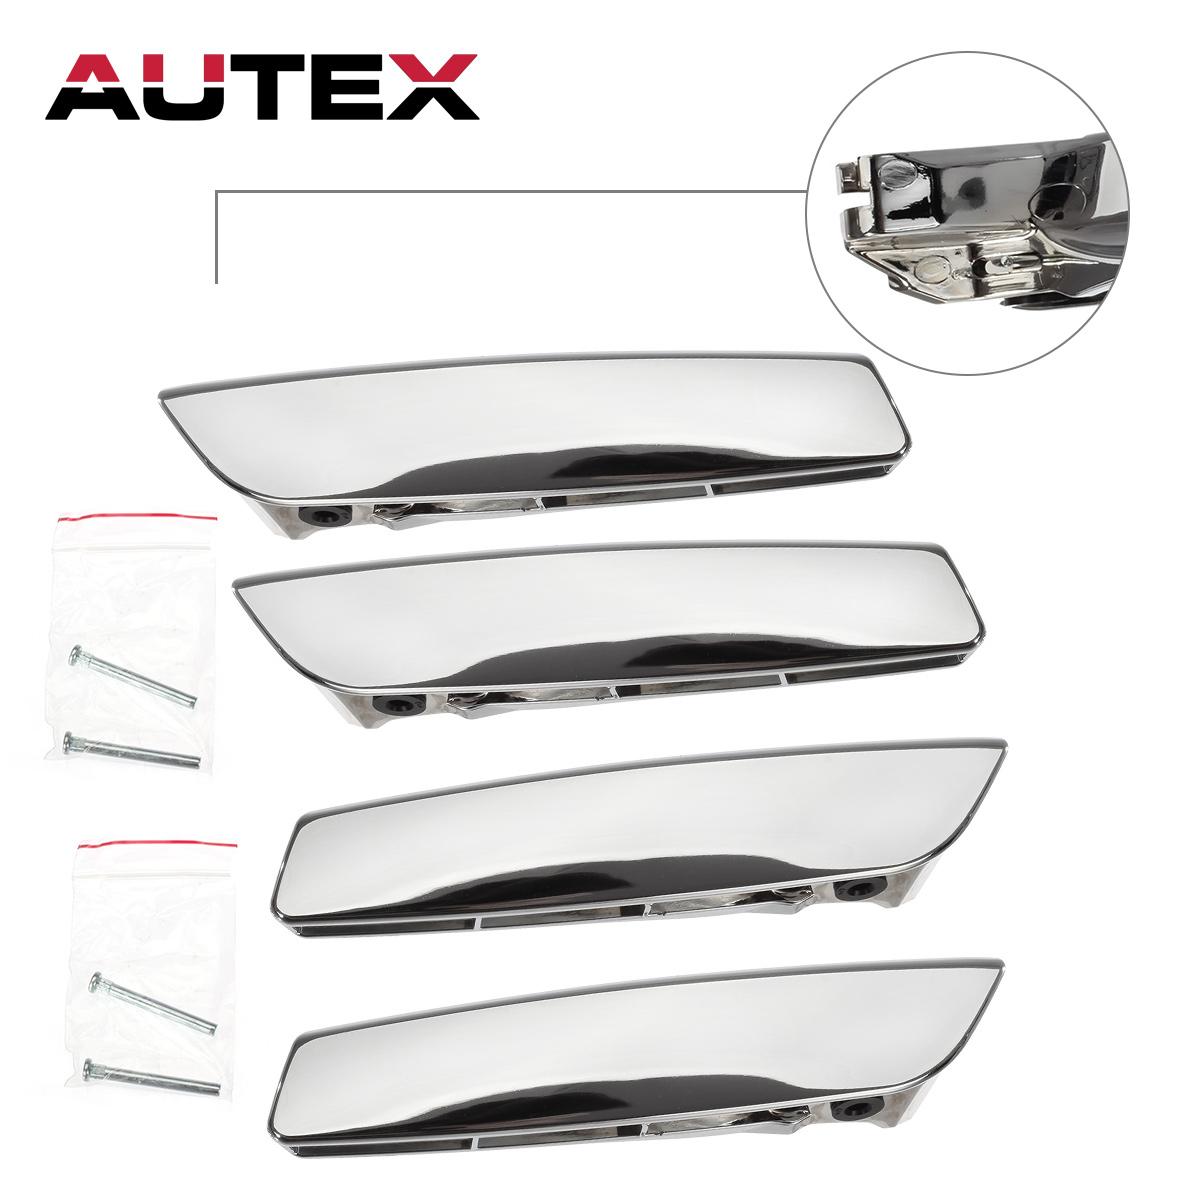 Details About 4pcs For Chevy Silverado 2500 3500hd Interior Chrome Door Handle Repair Kit